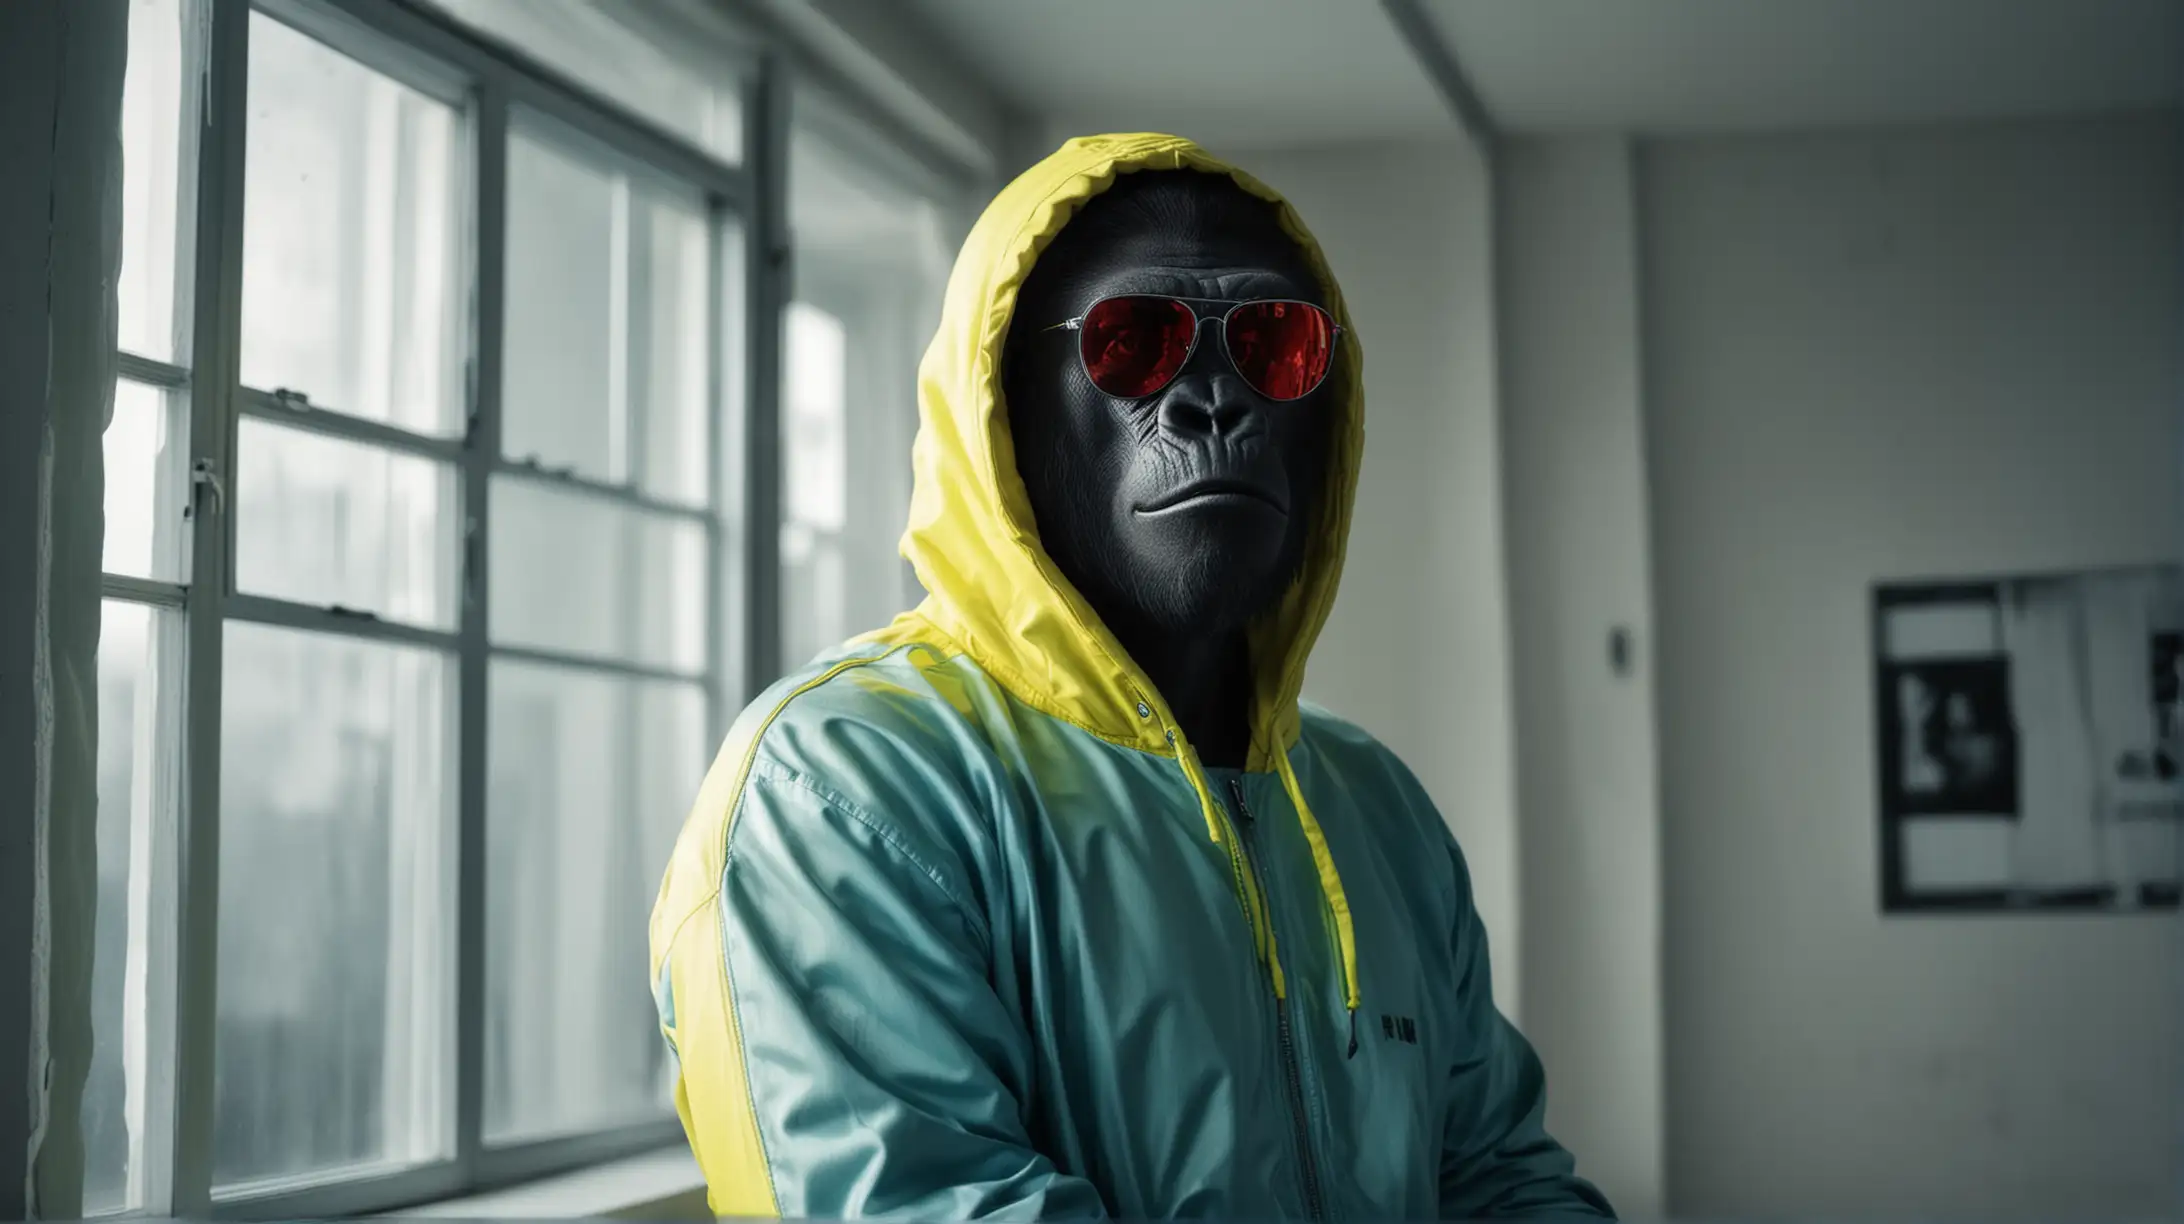  gorilla poses standing in a large white salon, next to a window. he is wearing sunglasses and yellow tracksuit like the one in breaking bad tv series with hoodie over his head. he wears light blue latex gloves. sleek style in black and white background posing like a high fashion model-serious sexy face. Room is quite dark, with bright red blue and green neon lights coming out from outside the window reflecting to his face. realistic photographic. low angle camera. 